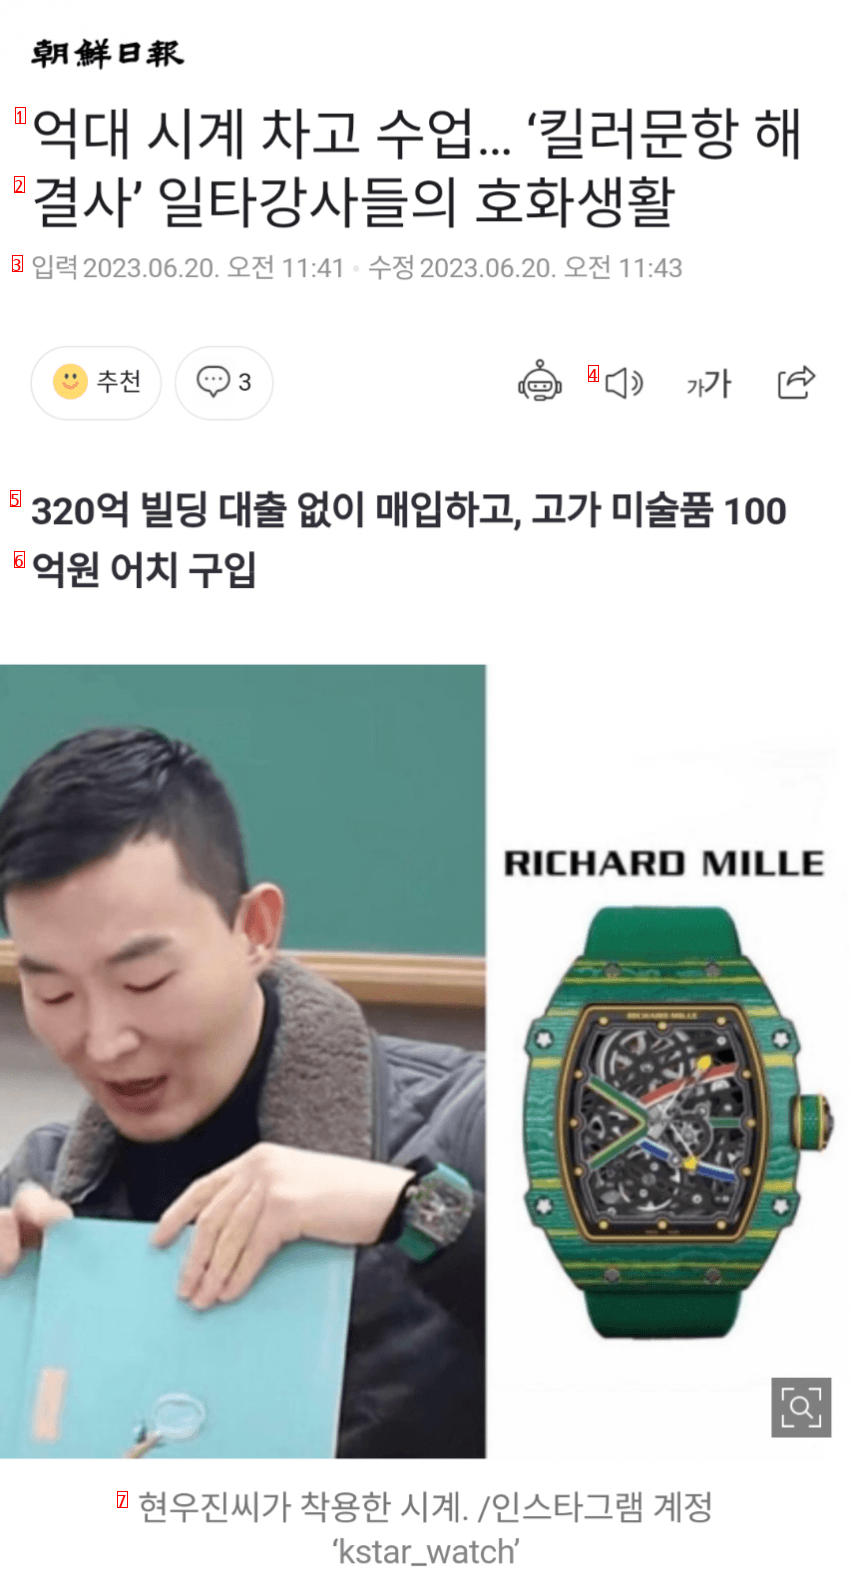 Class with a watch worth hundreds of millions...The luxury of one-time instructors who opposed the 'public education college entrance exam'